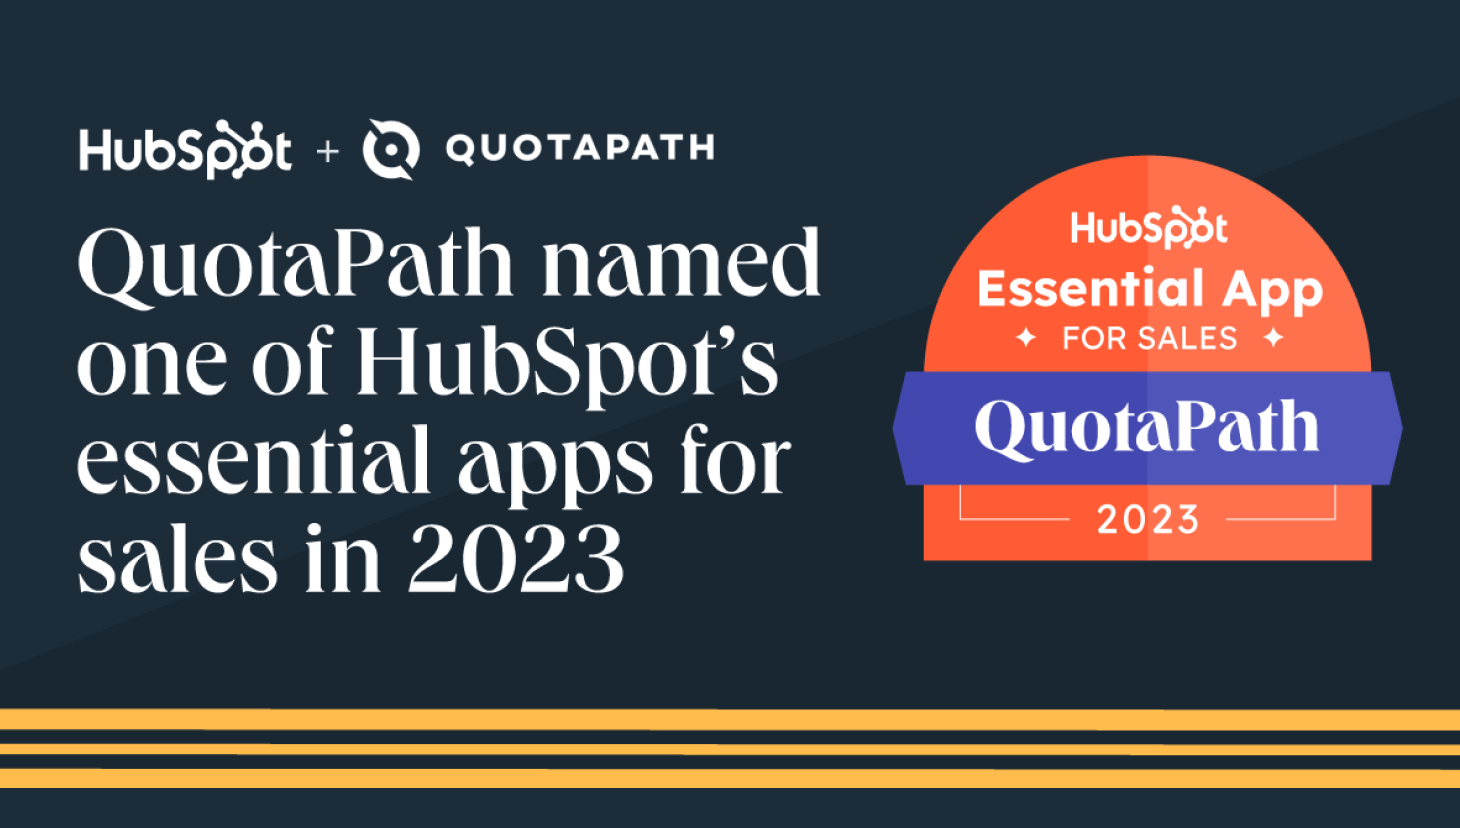 QuotaPath HubSpot commission tracking -- QuotaPath named a HubSpot essential app for sales tech stacks, image features this copy